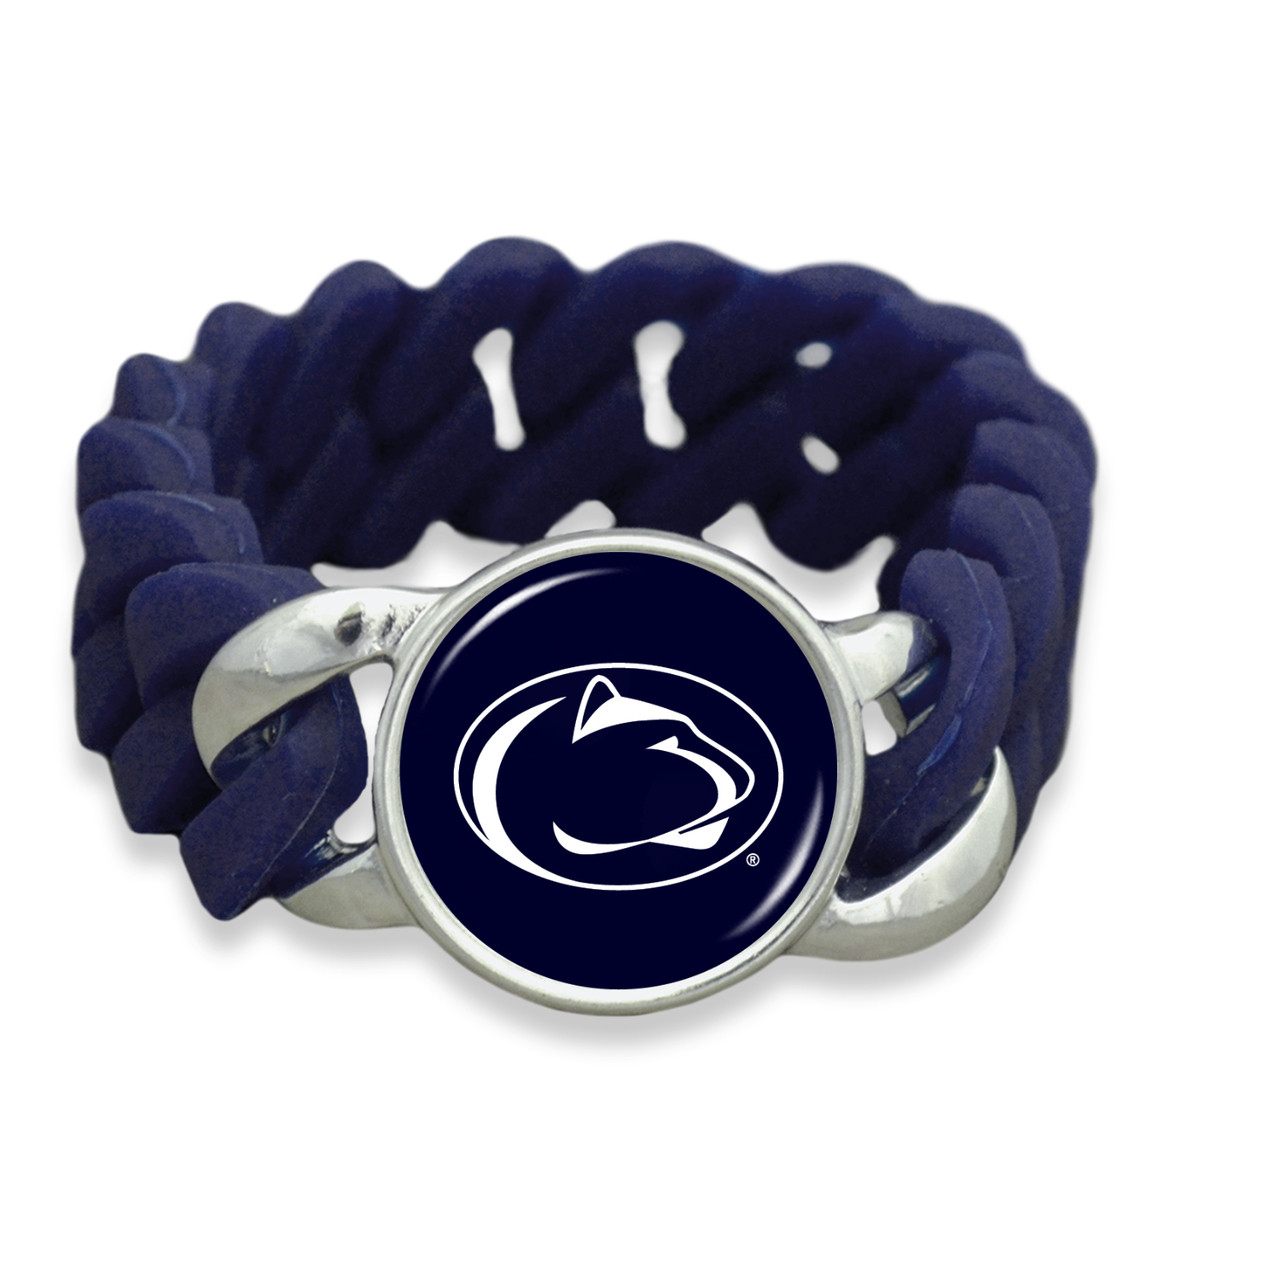 Penn State Nittany Lions Team Color Silicone Stretch College Bracelet